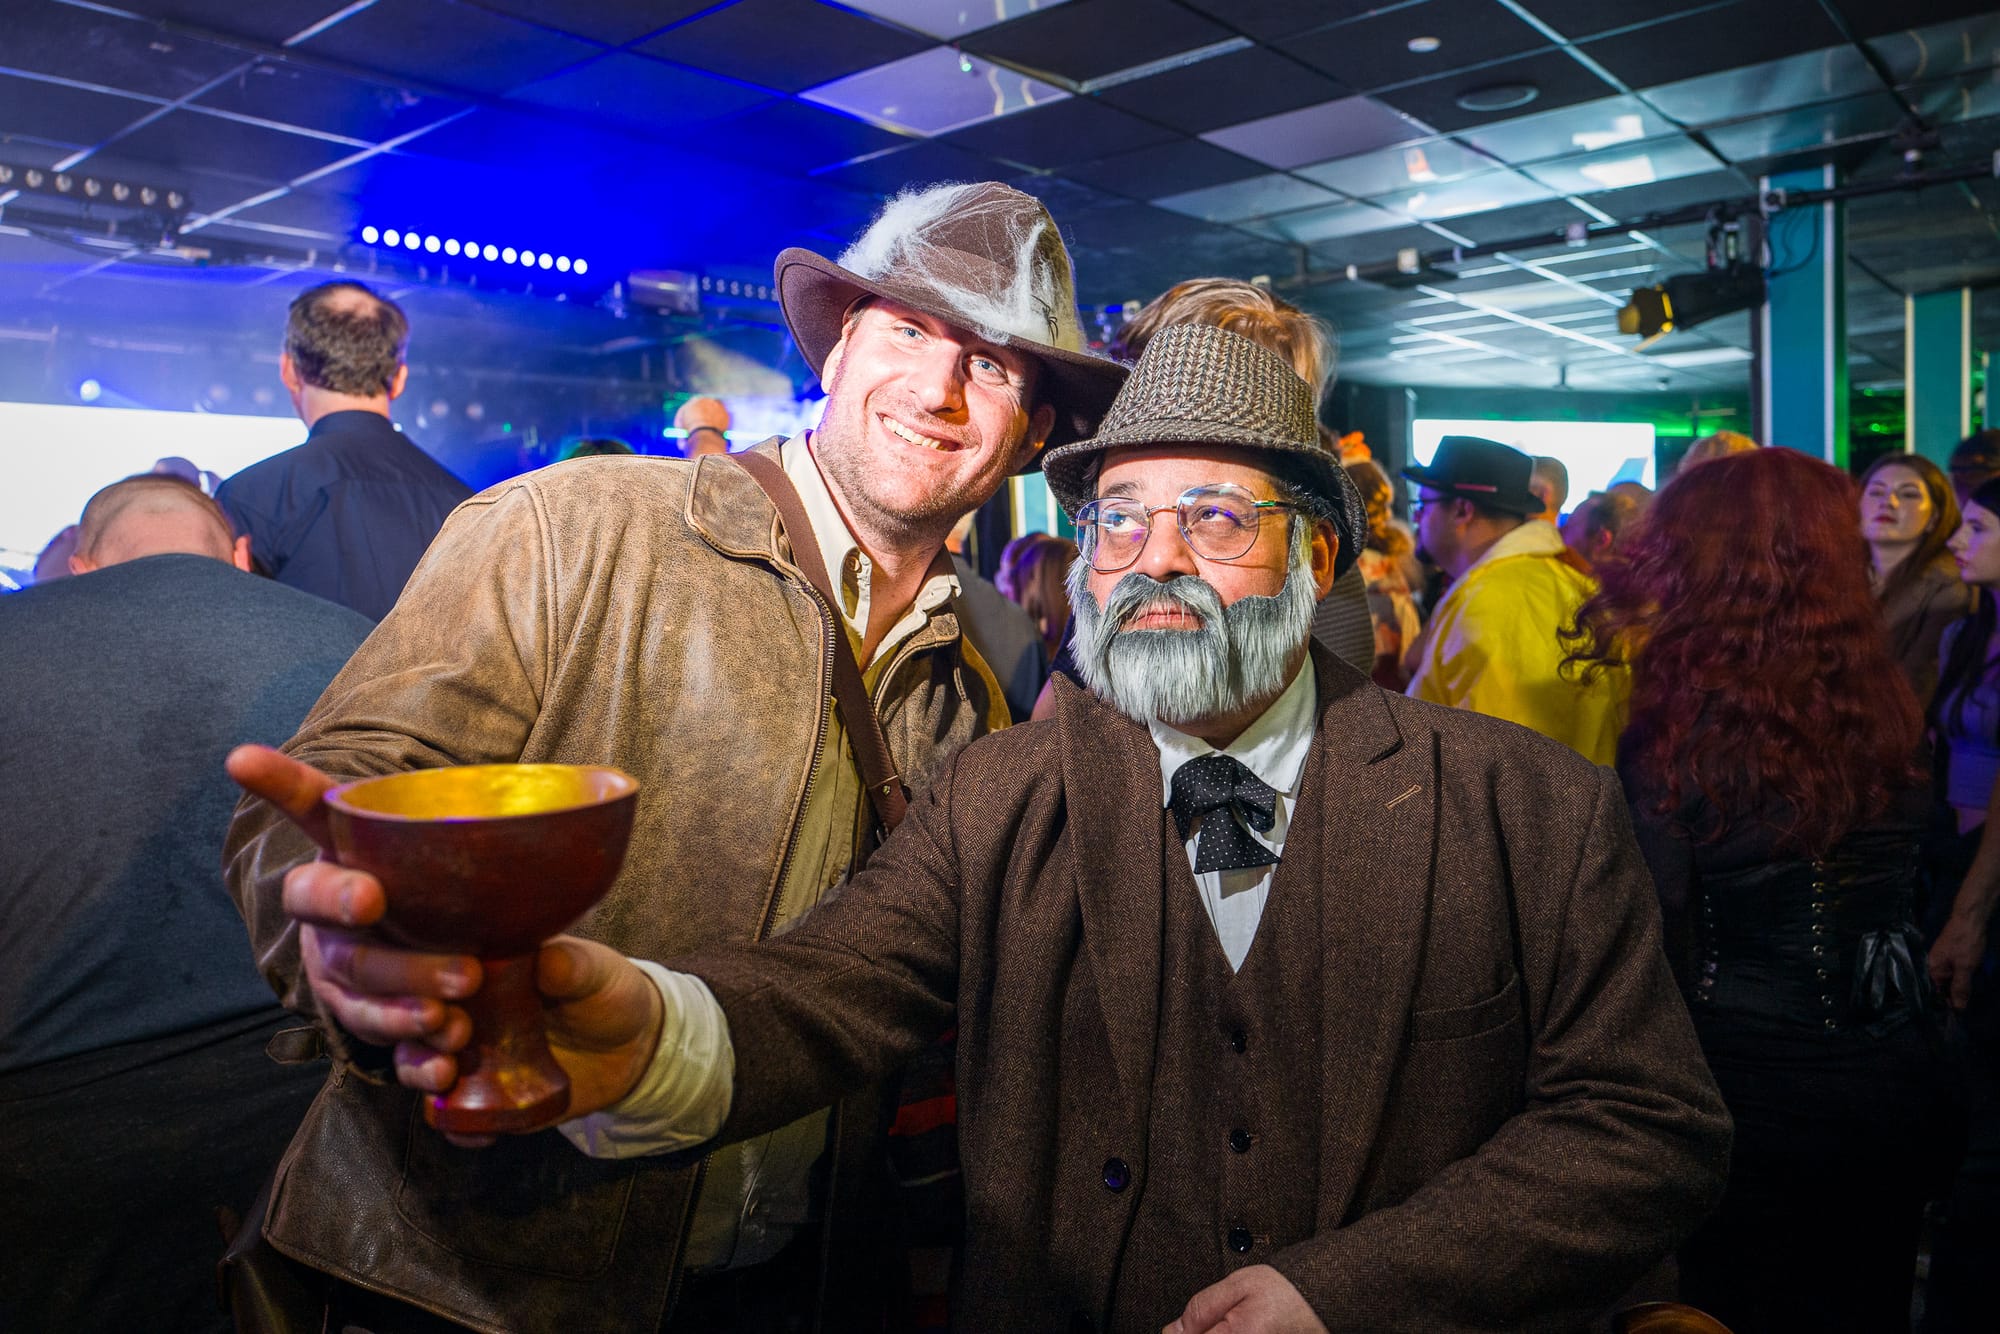 Two people cosplay as Indiana Jones and his father.